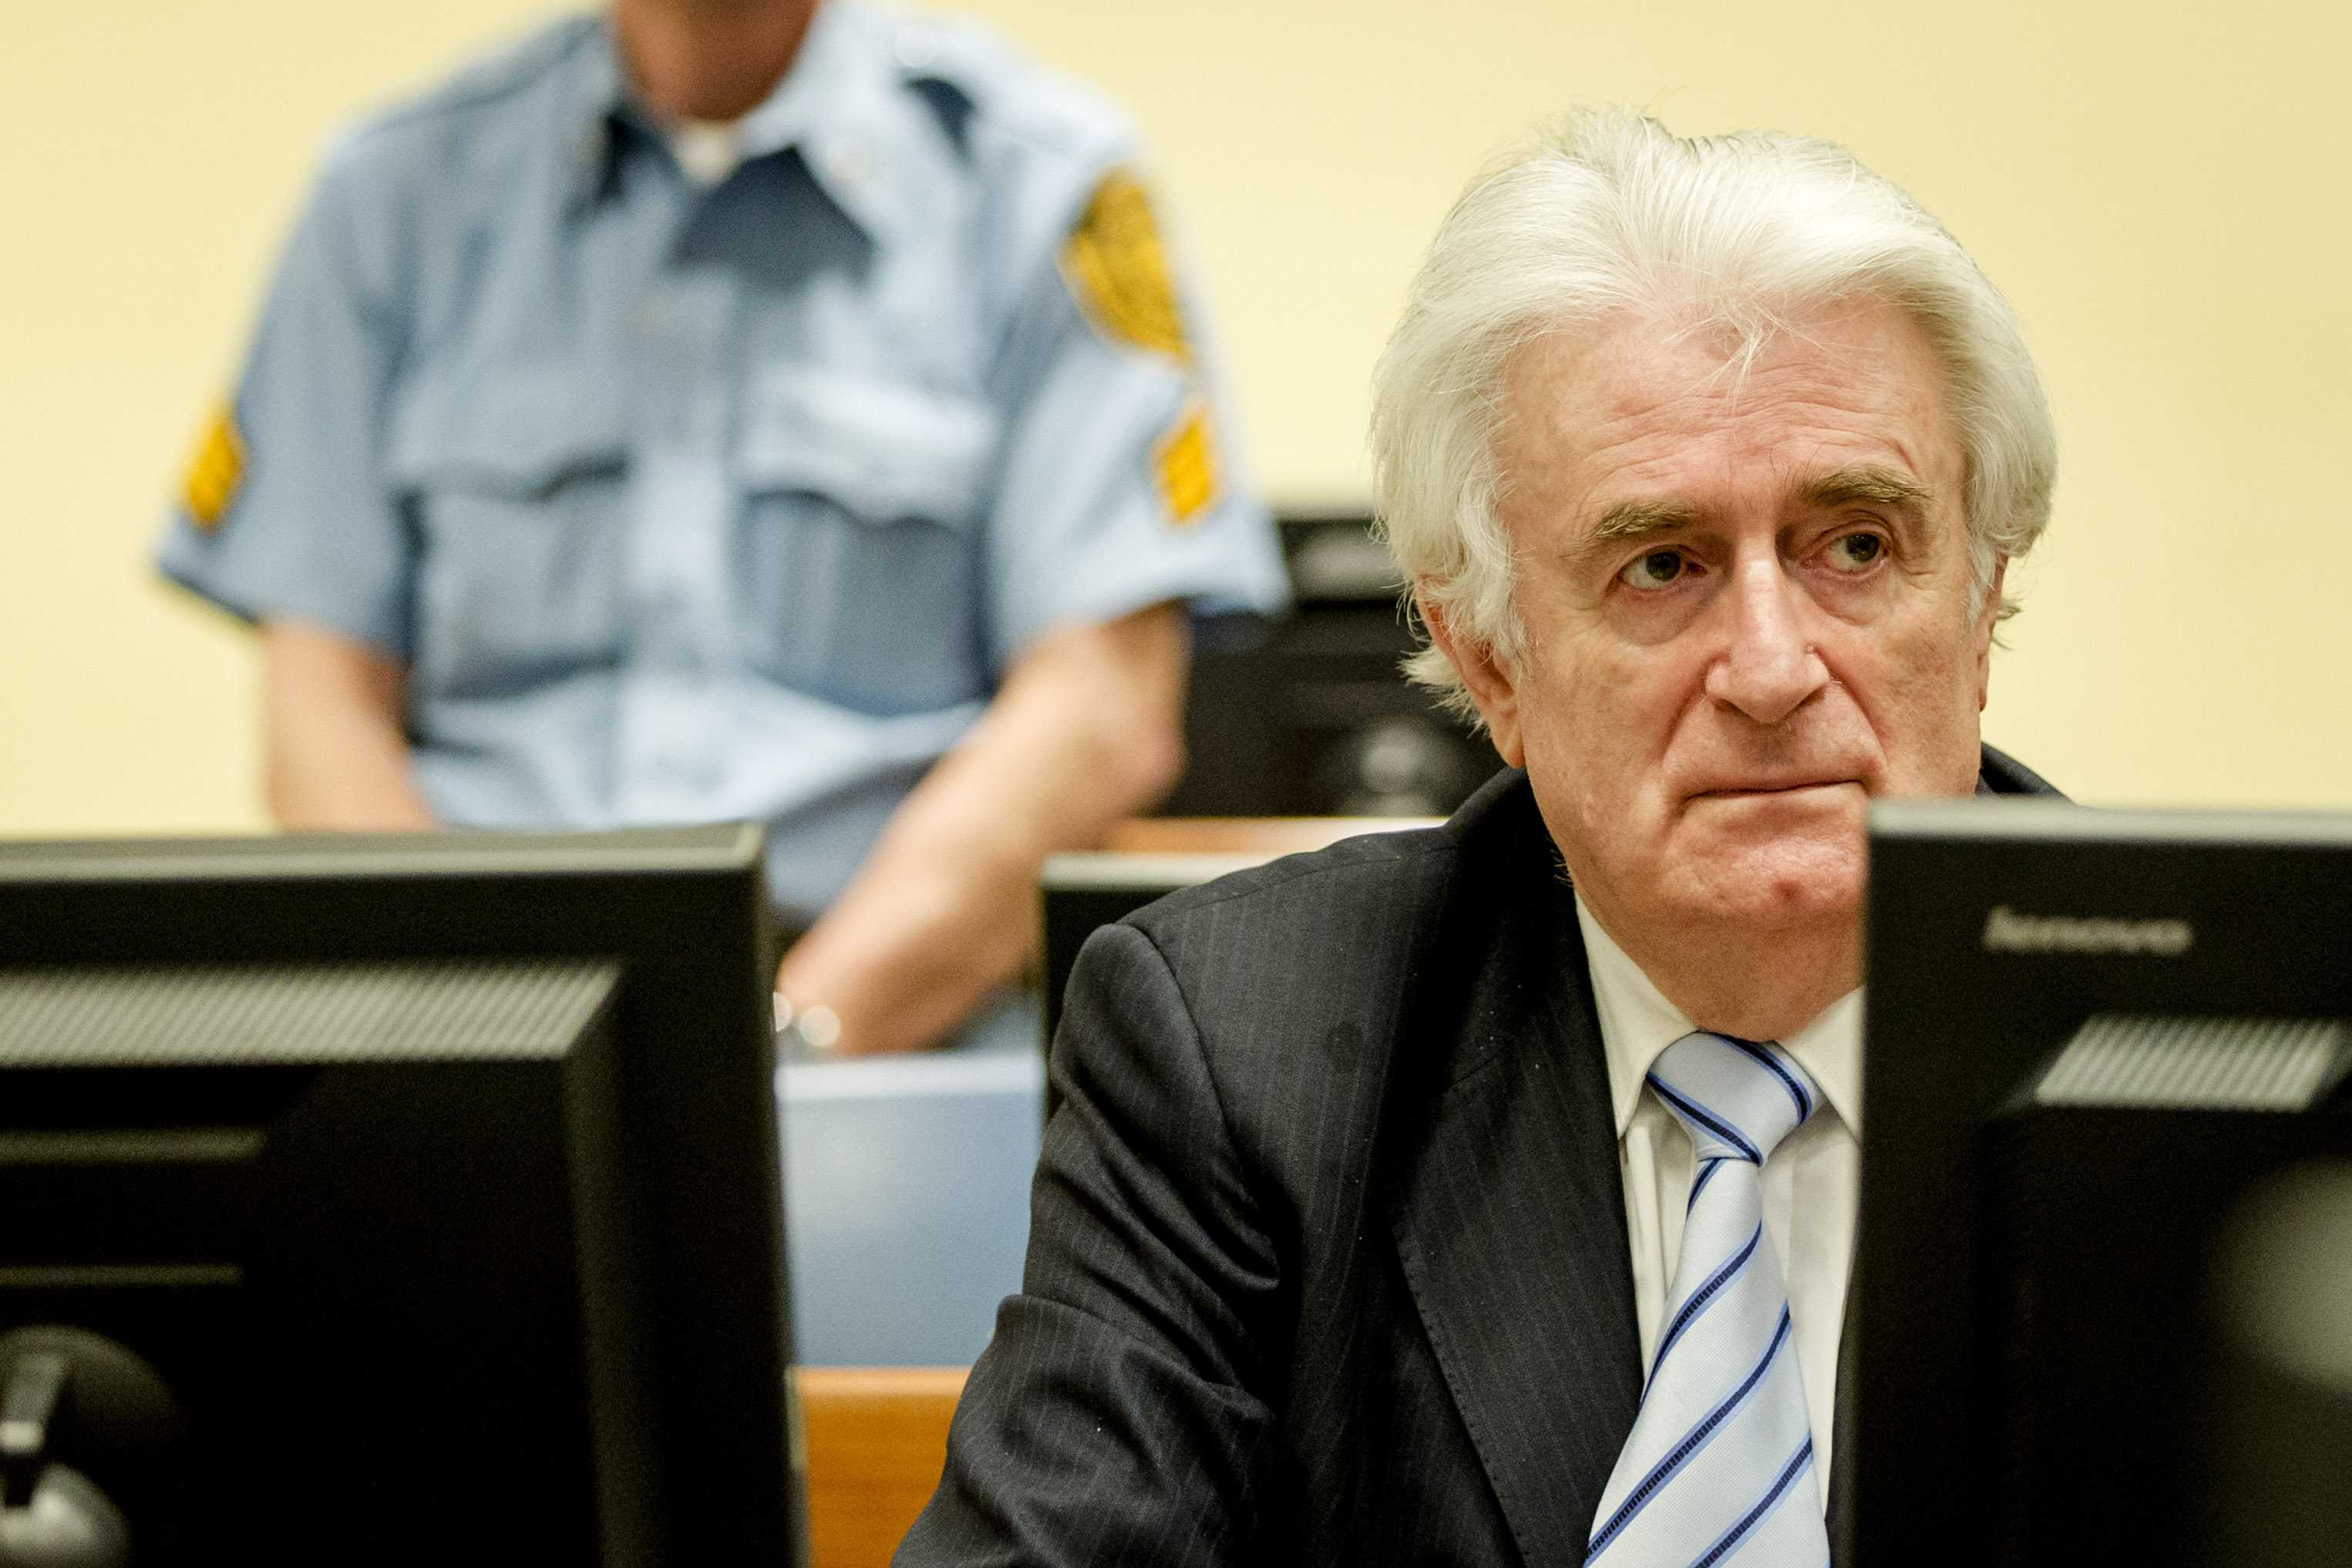 epa05228997 Bosnian Serb wartime leader Radovan Karadzic (R) sits in the courtroom for the reading of his verdict at the International Criminal Tribunal for Former Yugoslavia (ICTY) in The Hague, The Netherlands, 24 March 2016. The former Bosnian-Serbs leader is indicted for genocide, crimes against humanity, and war crimes. Karadzic is considered the main responsible for the Srebrenica massacre.  EPA/ROBIN VAN LONKHUIJSEN / POOL